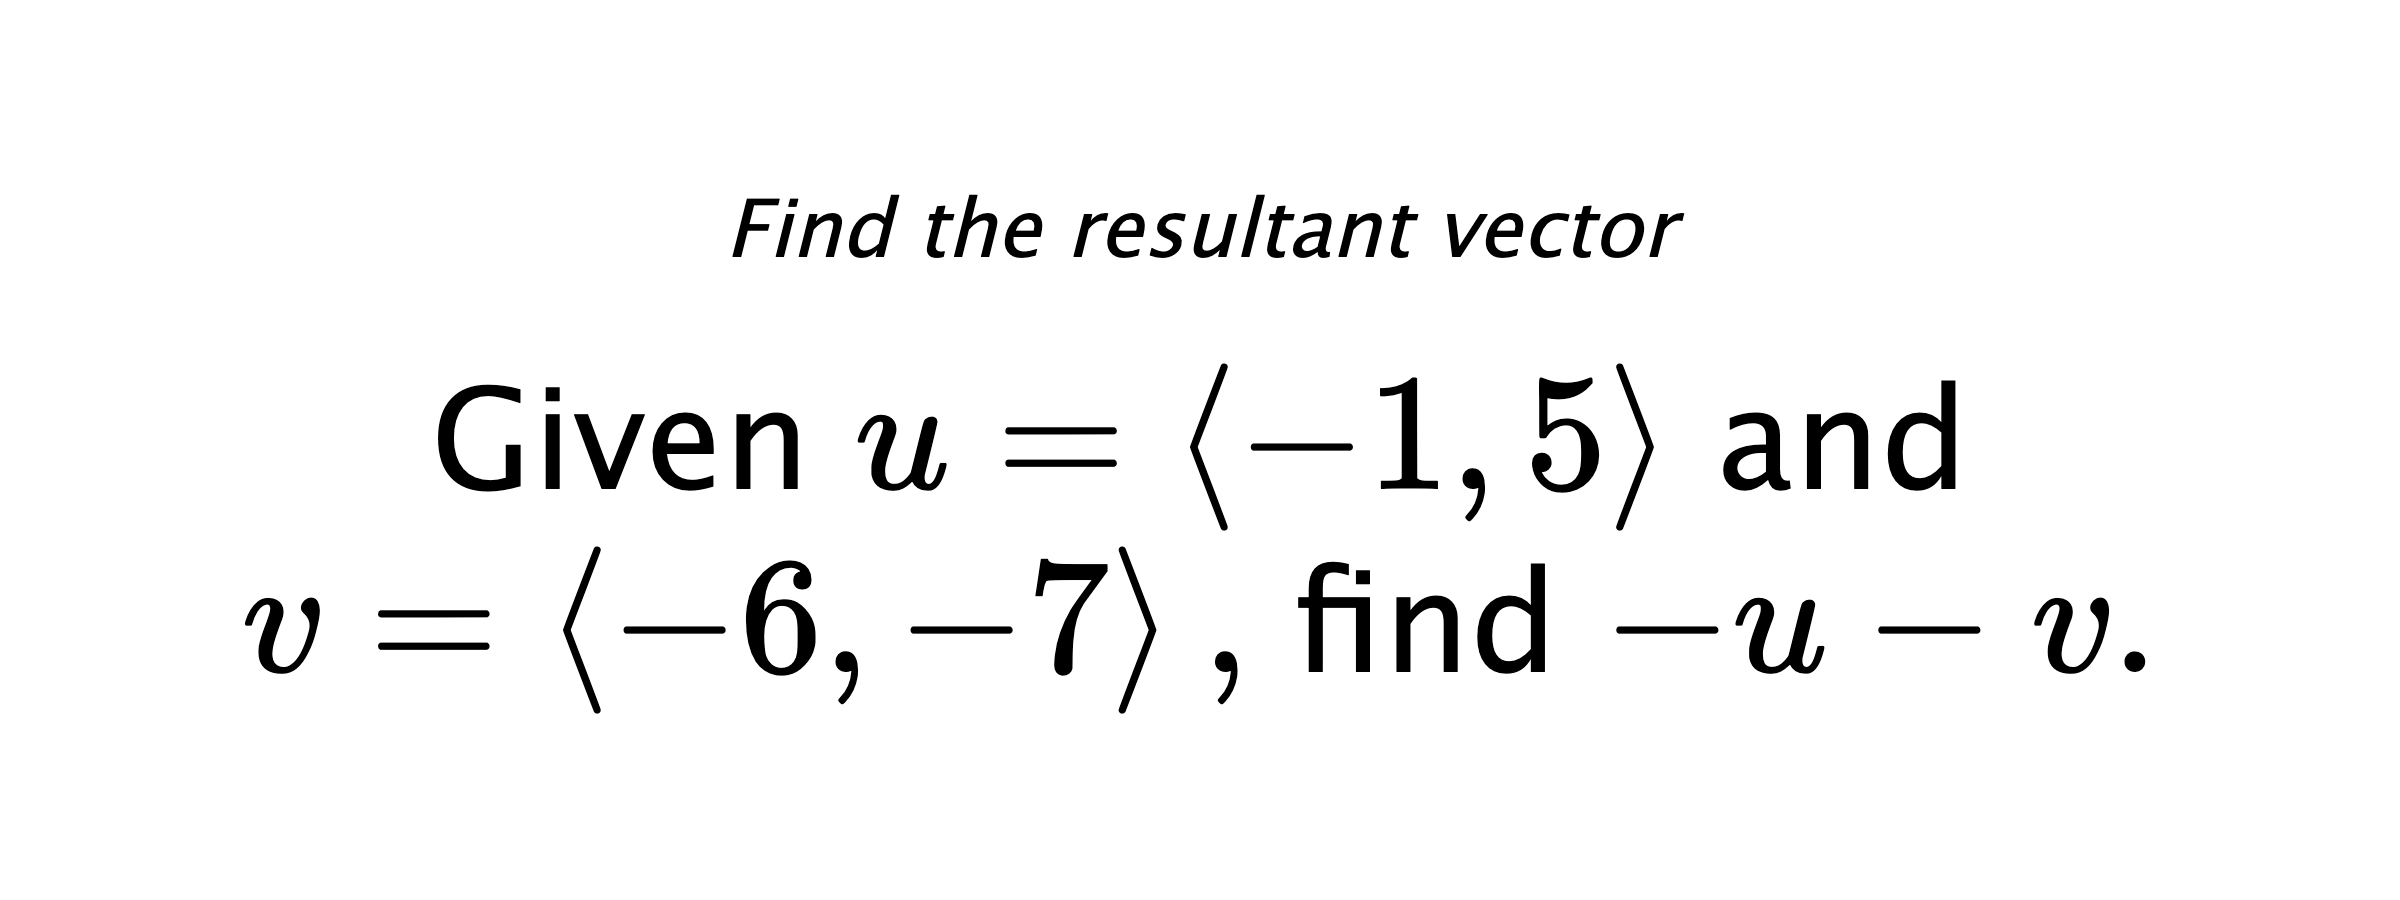 Find the resultant vector Given $ u = \left< -1,5 \right> $ and $ v = \left< -6,-7 \right> ,$ find $ -u-v .$